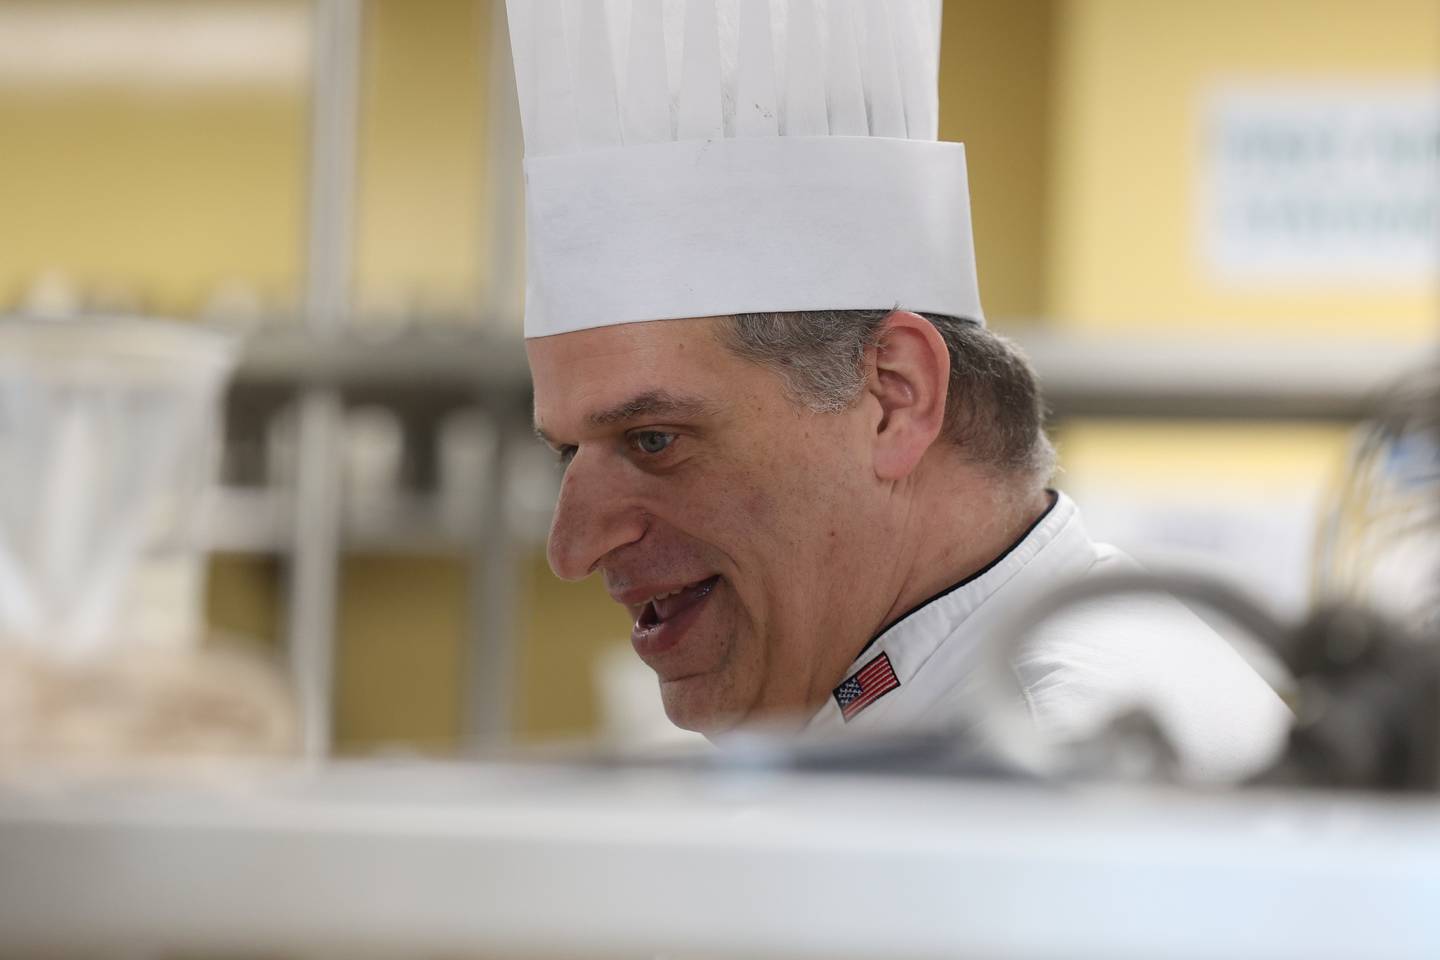 Chef Andy Chlebana works with a student at one of his pastry classes at the Joliet Junior College City Center Campus on Wednesday, March 1st, 2023. Andy has won numerous awards, including 1st place in two competitive television series on the Food Network.